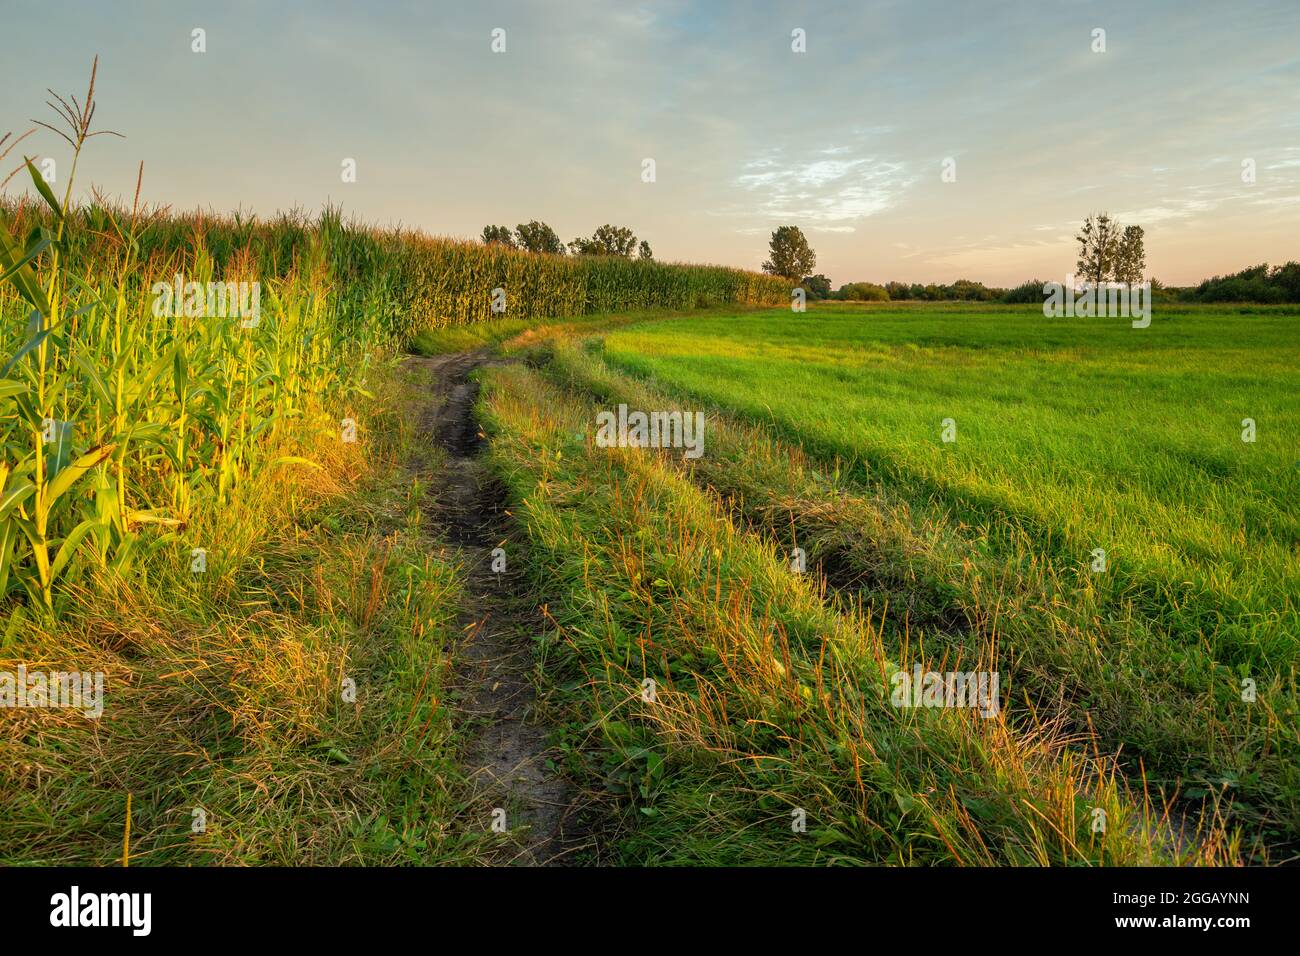 Dirt road next to a meadow and corn field Stock Photo